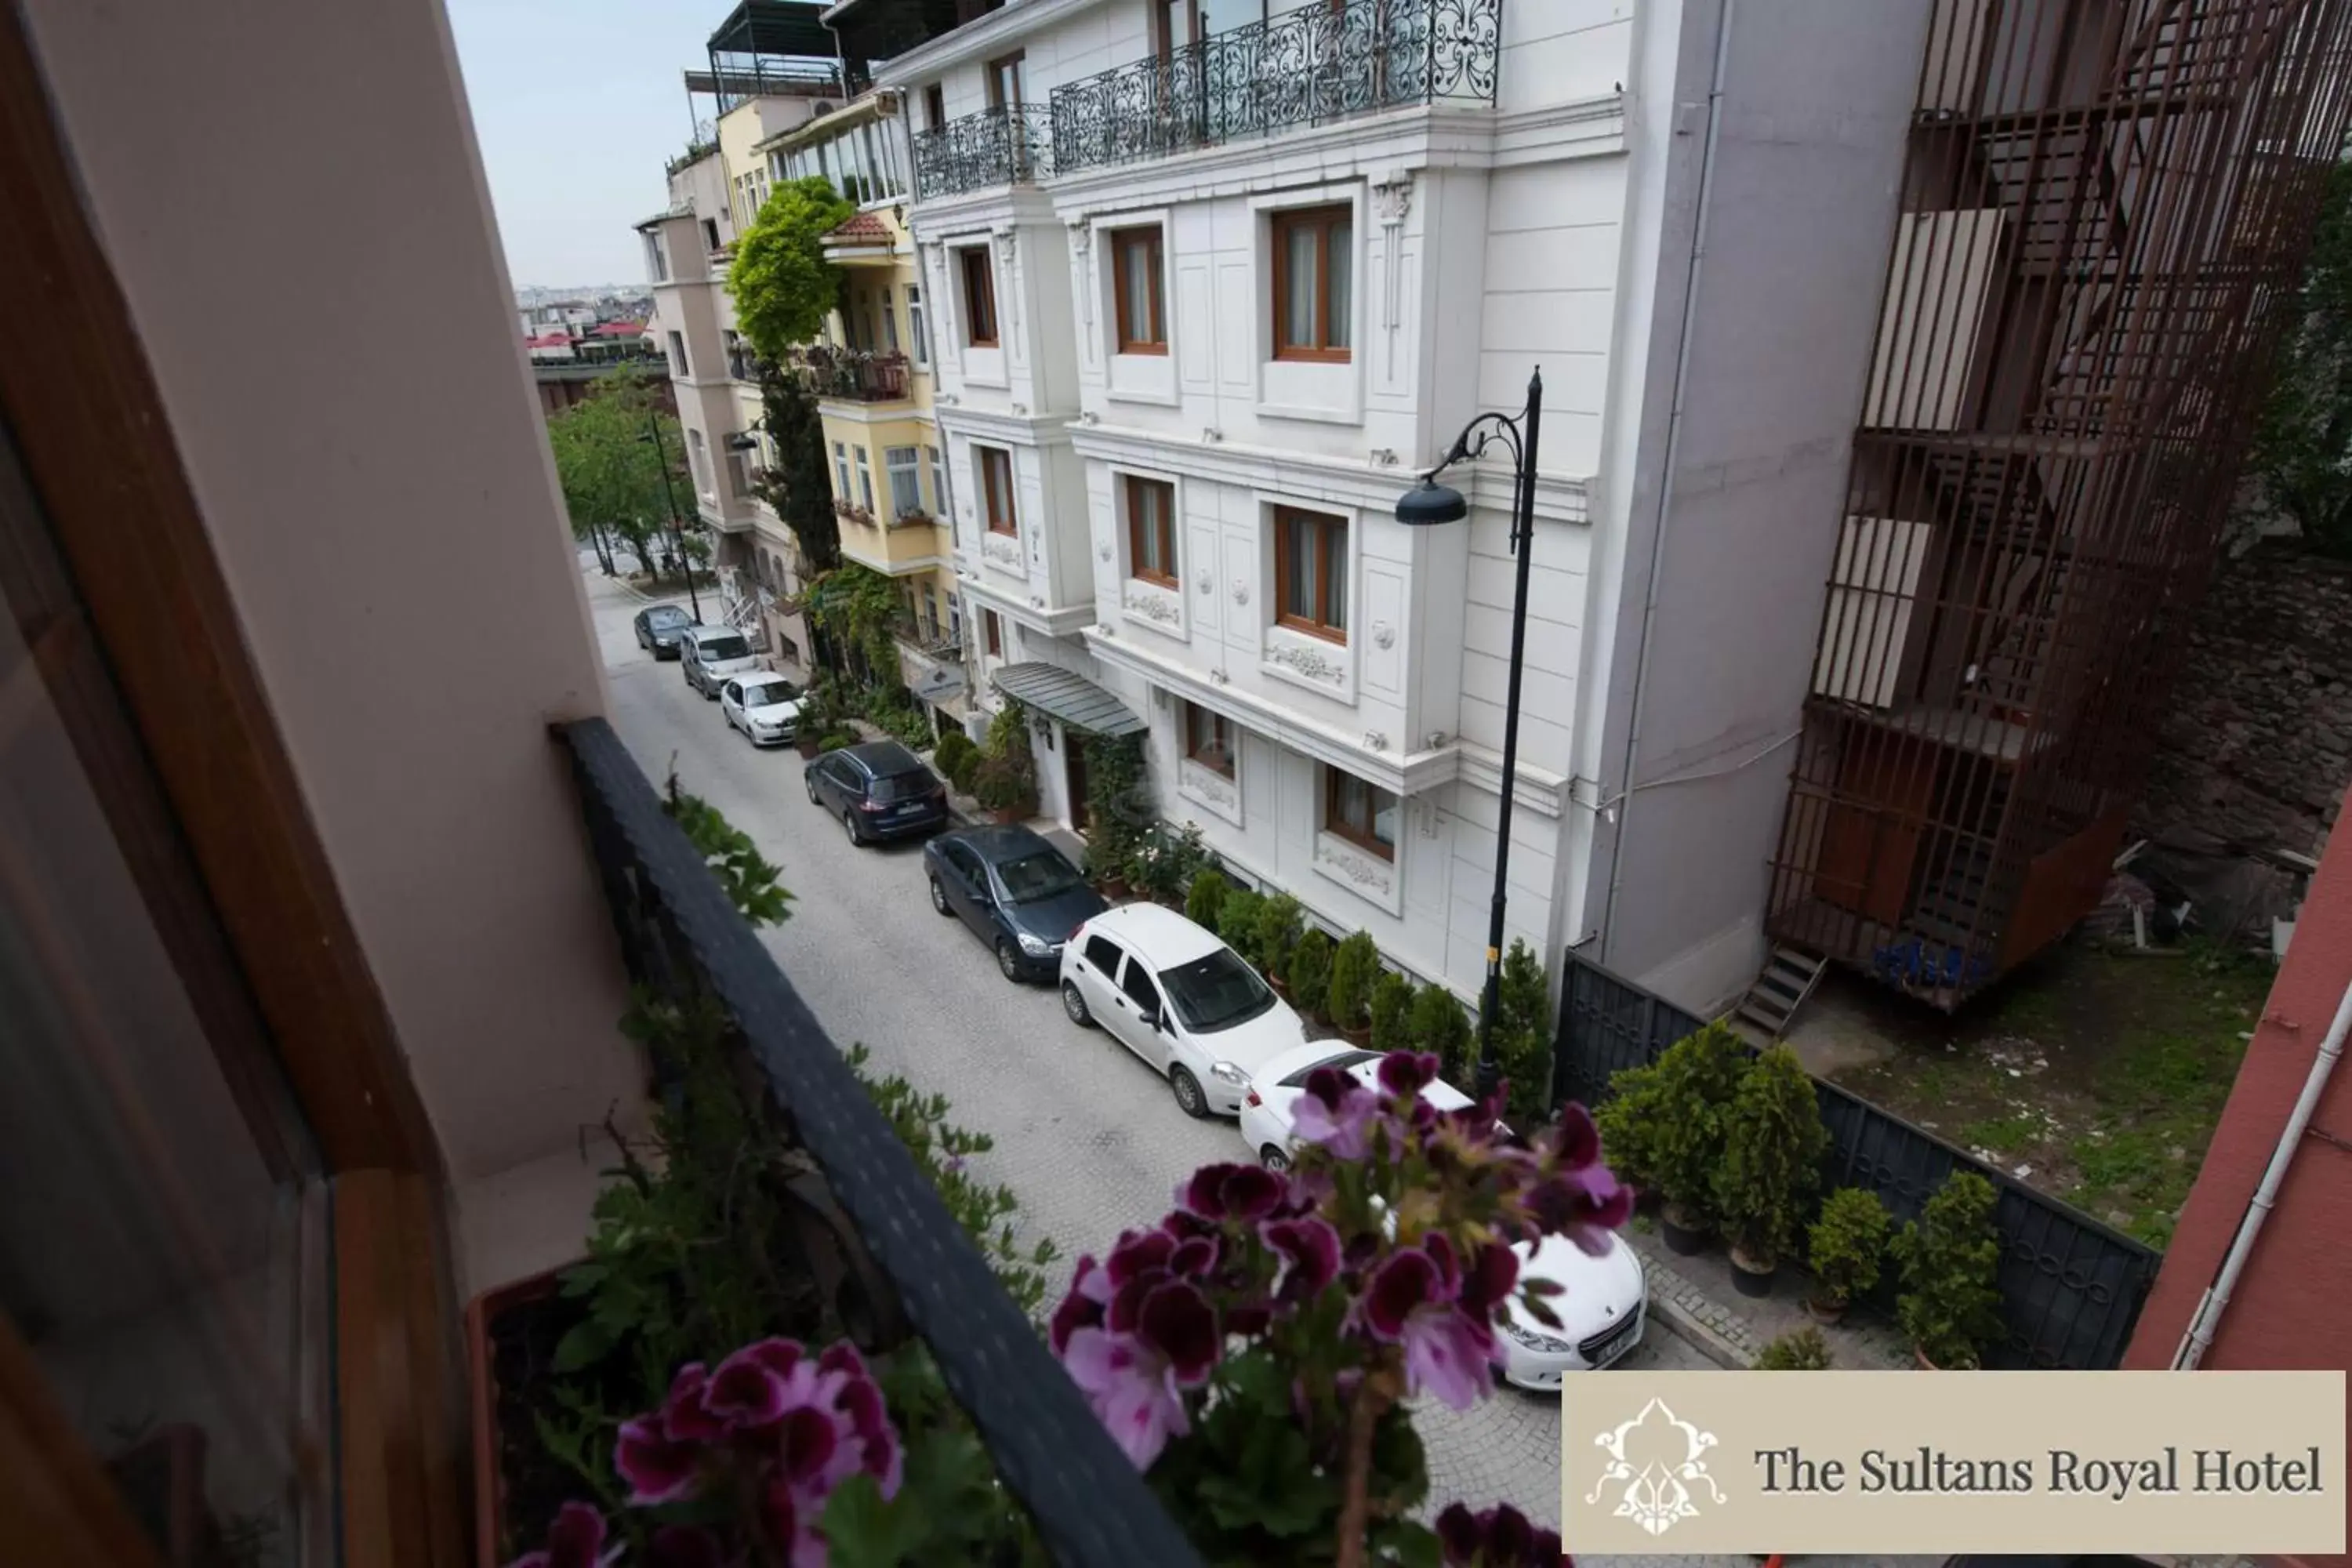 Street view in Sultans Royal Hotel